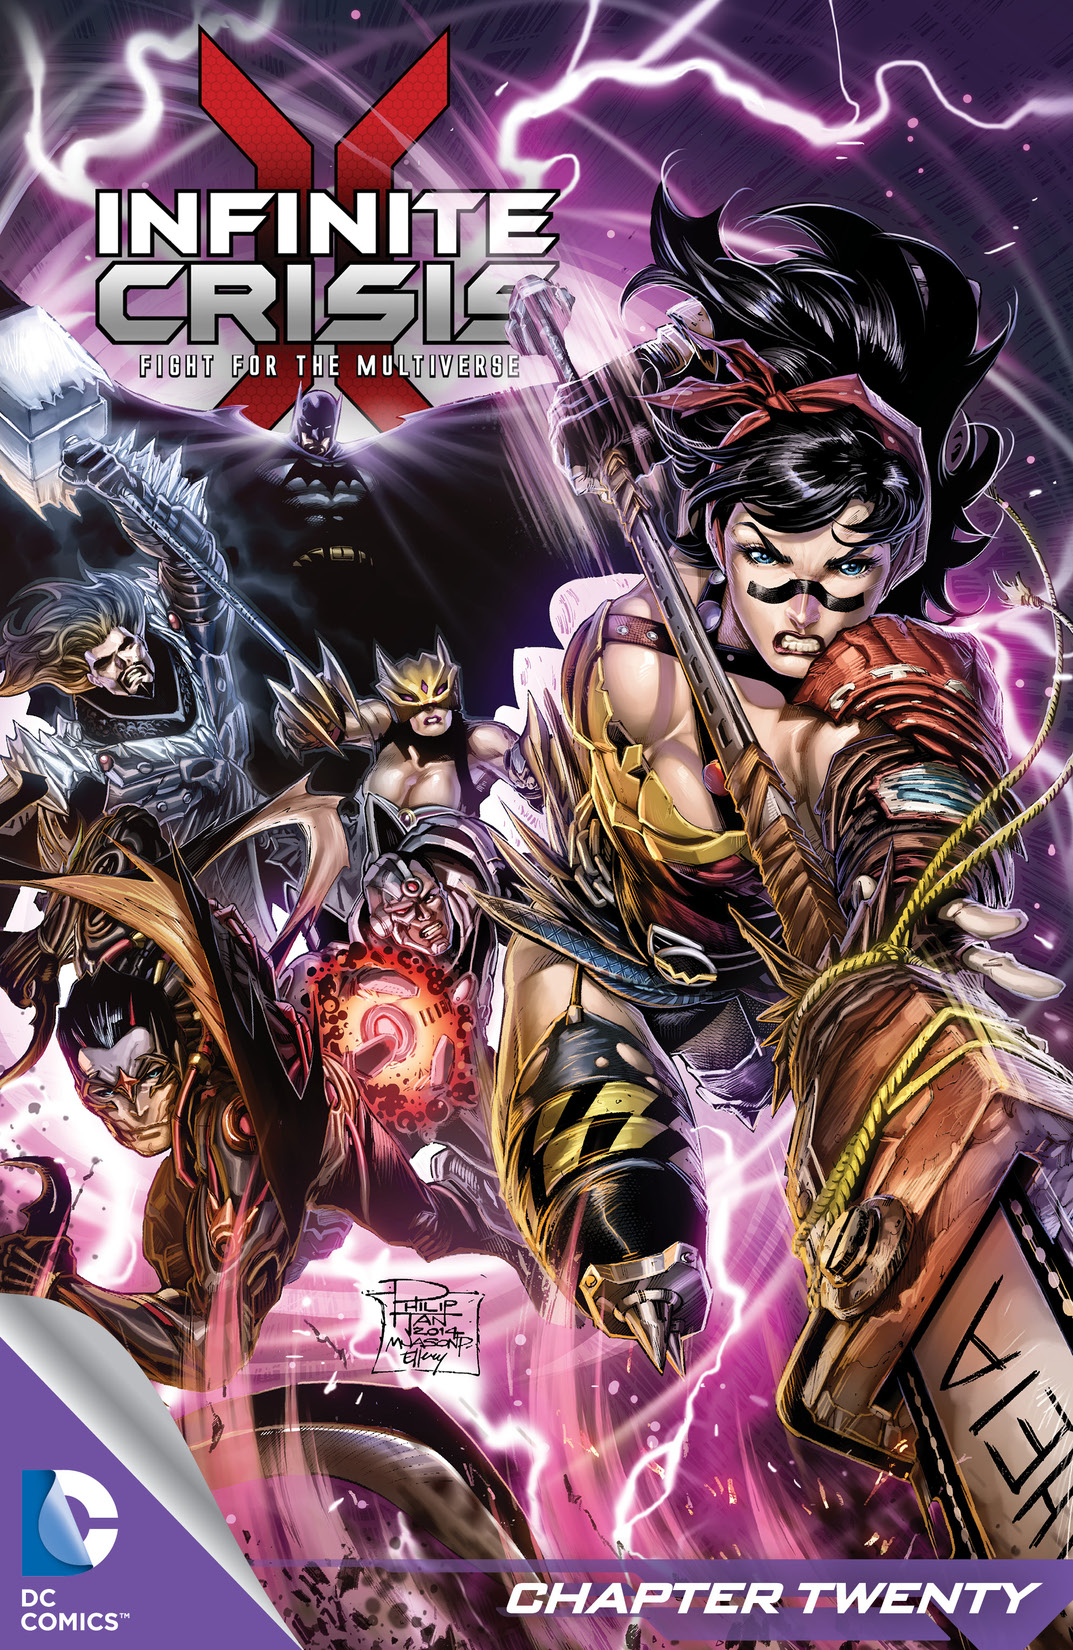 Infinite Crisis: Fight for the Multiverse #20 preview images